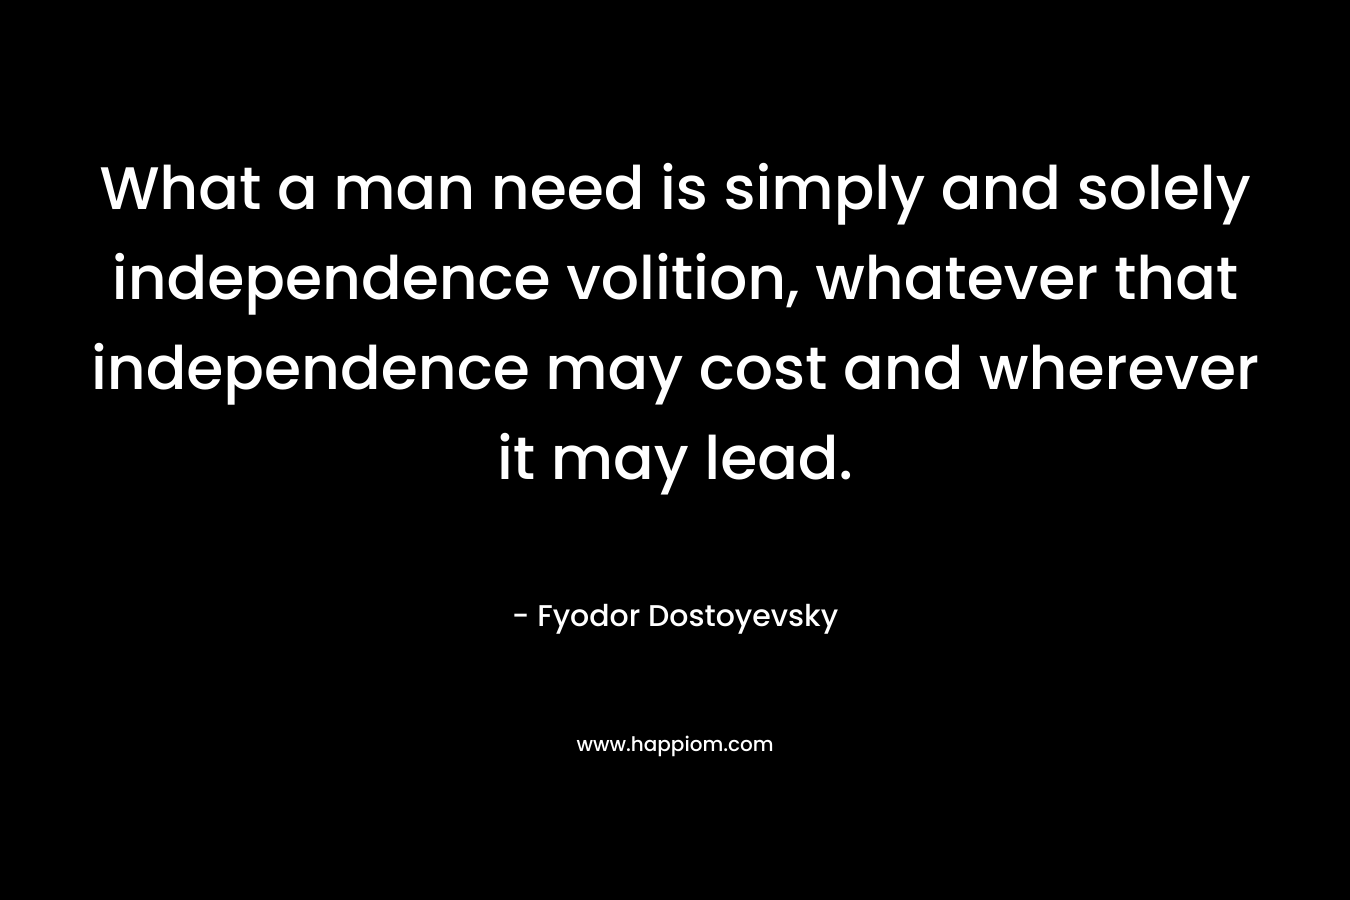 What a man need is simply and solely independence volition, whatever that independence may cost and wherever it may lead.